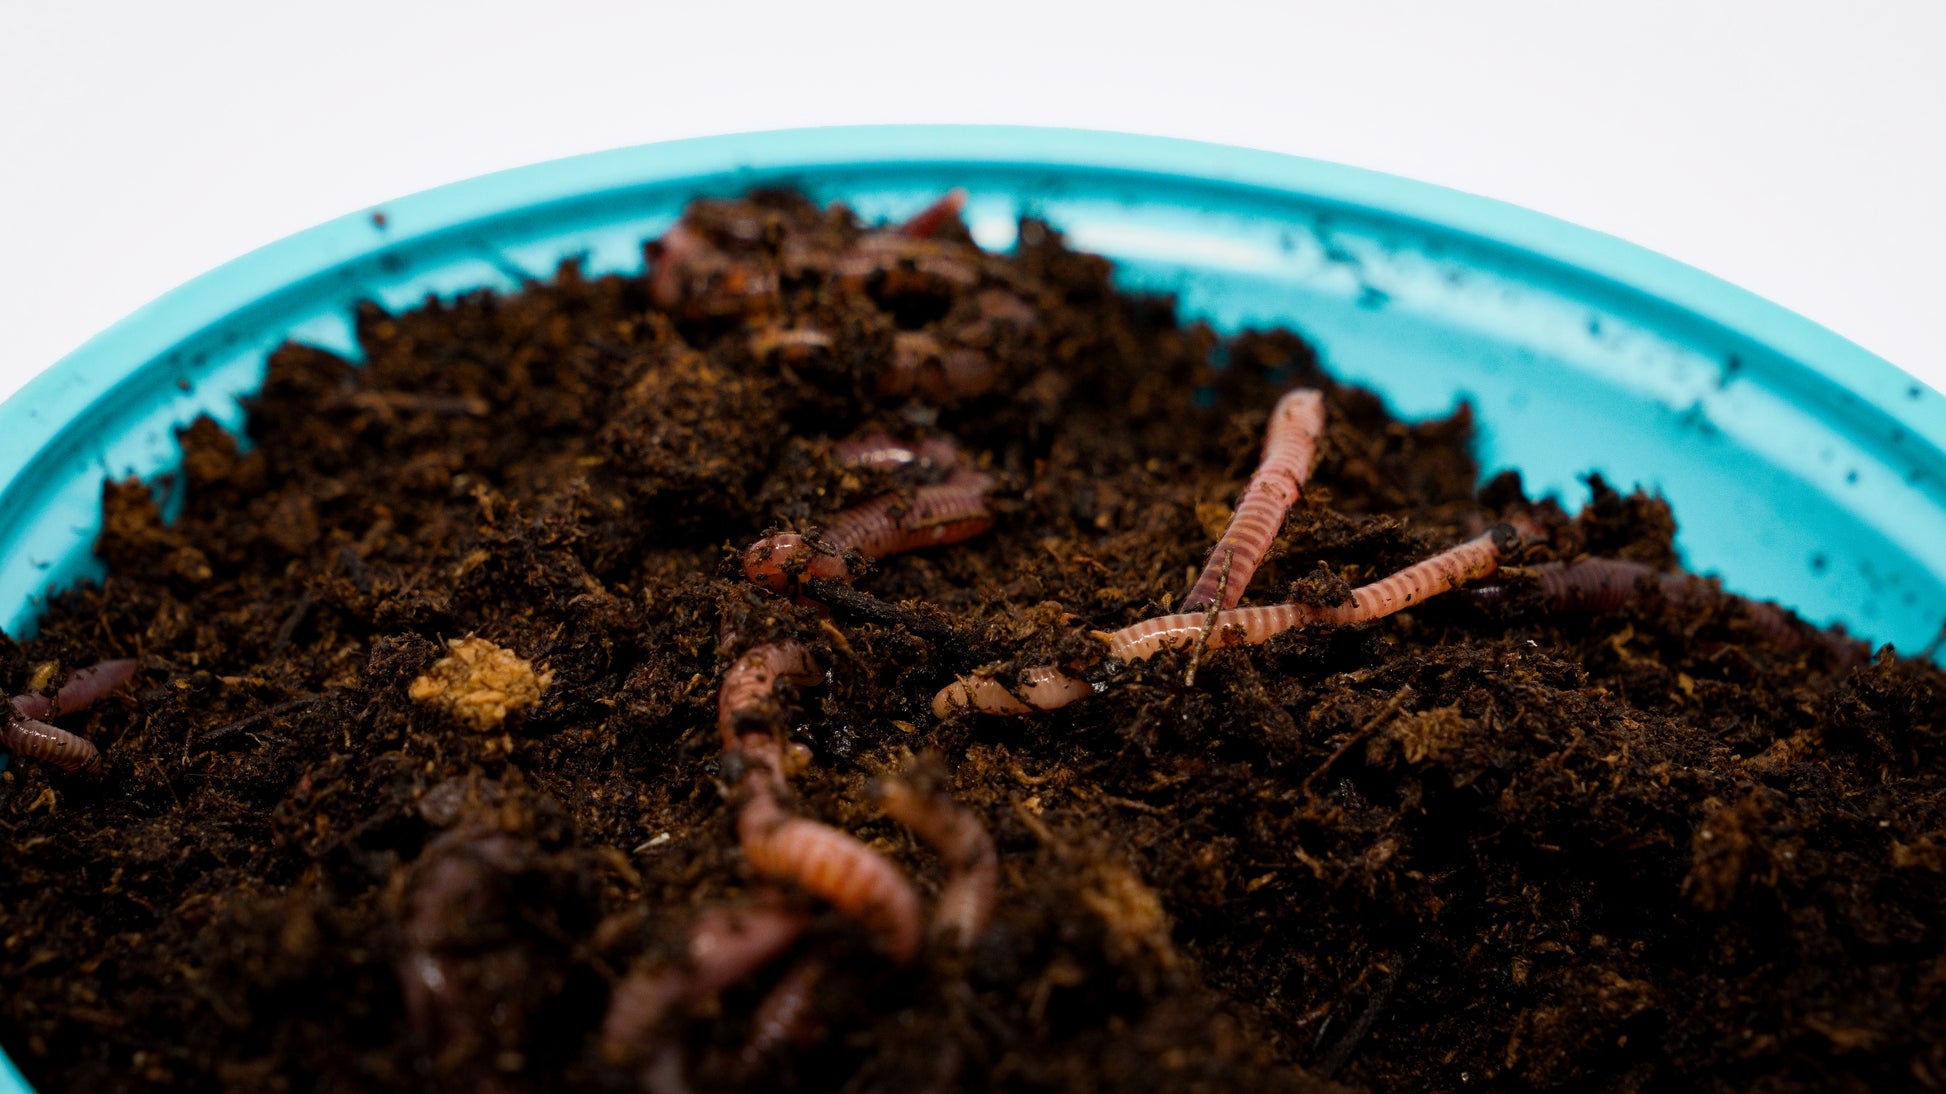 Red Wigglers For Sale